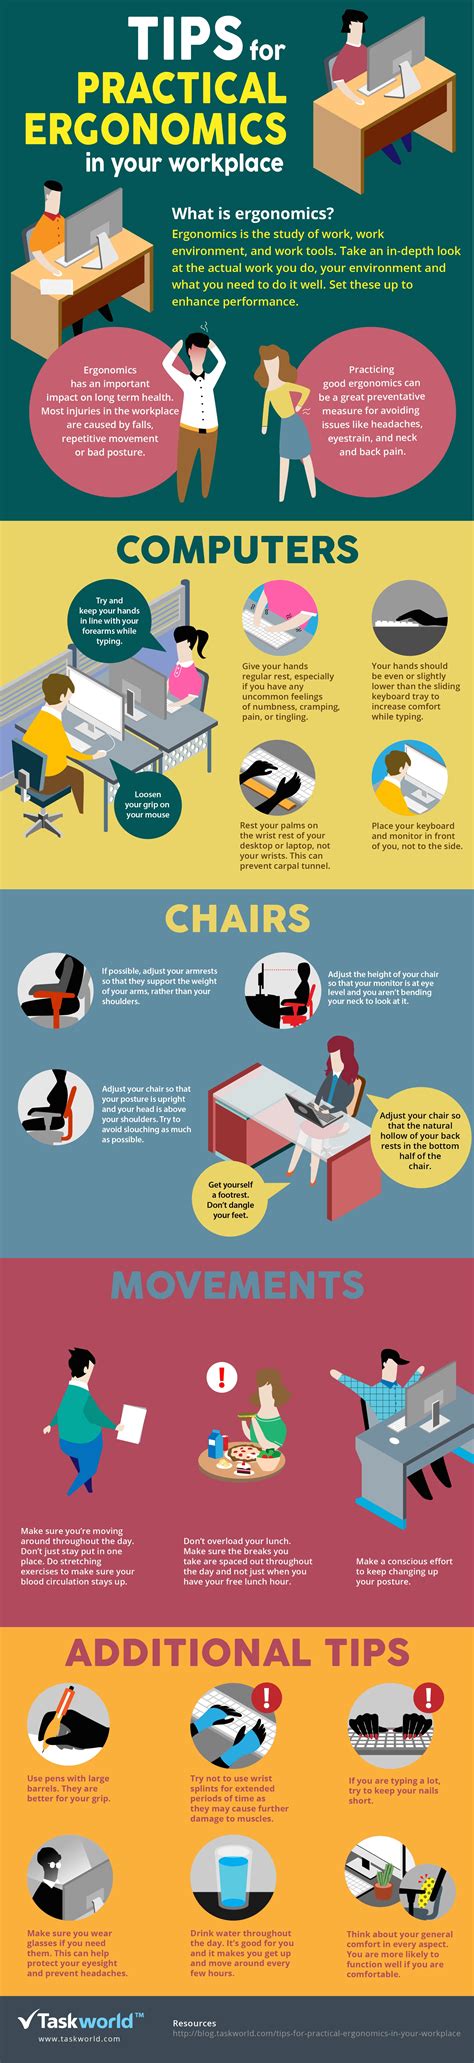 Tips For Practical Ergonomics In Your Workplace